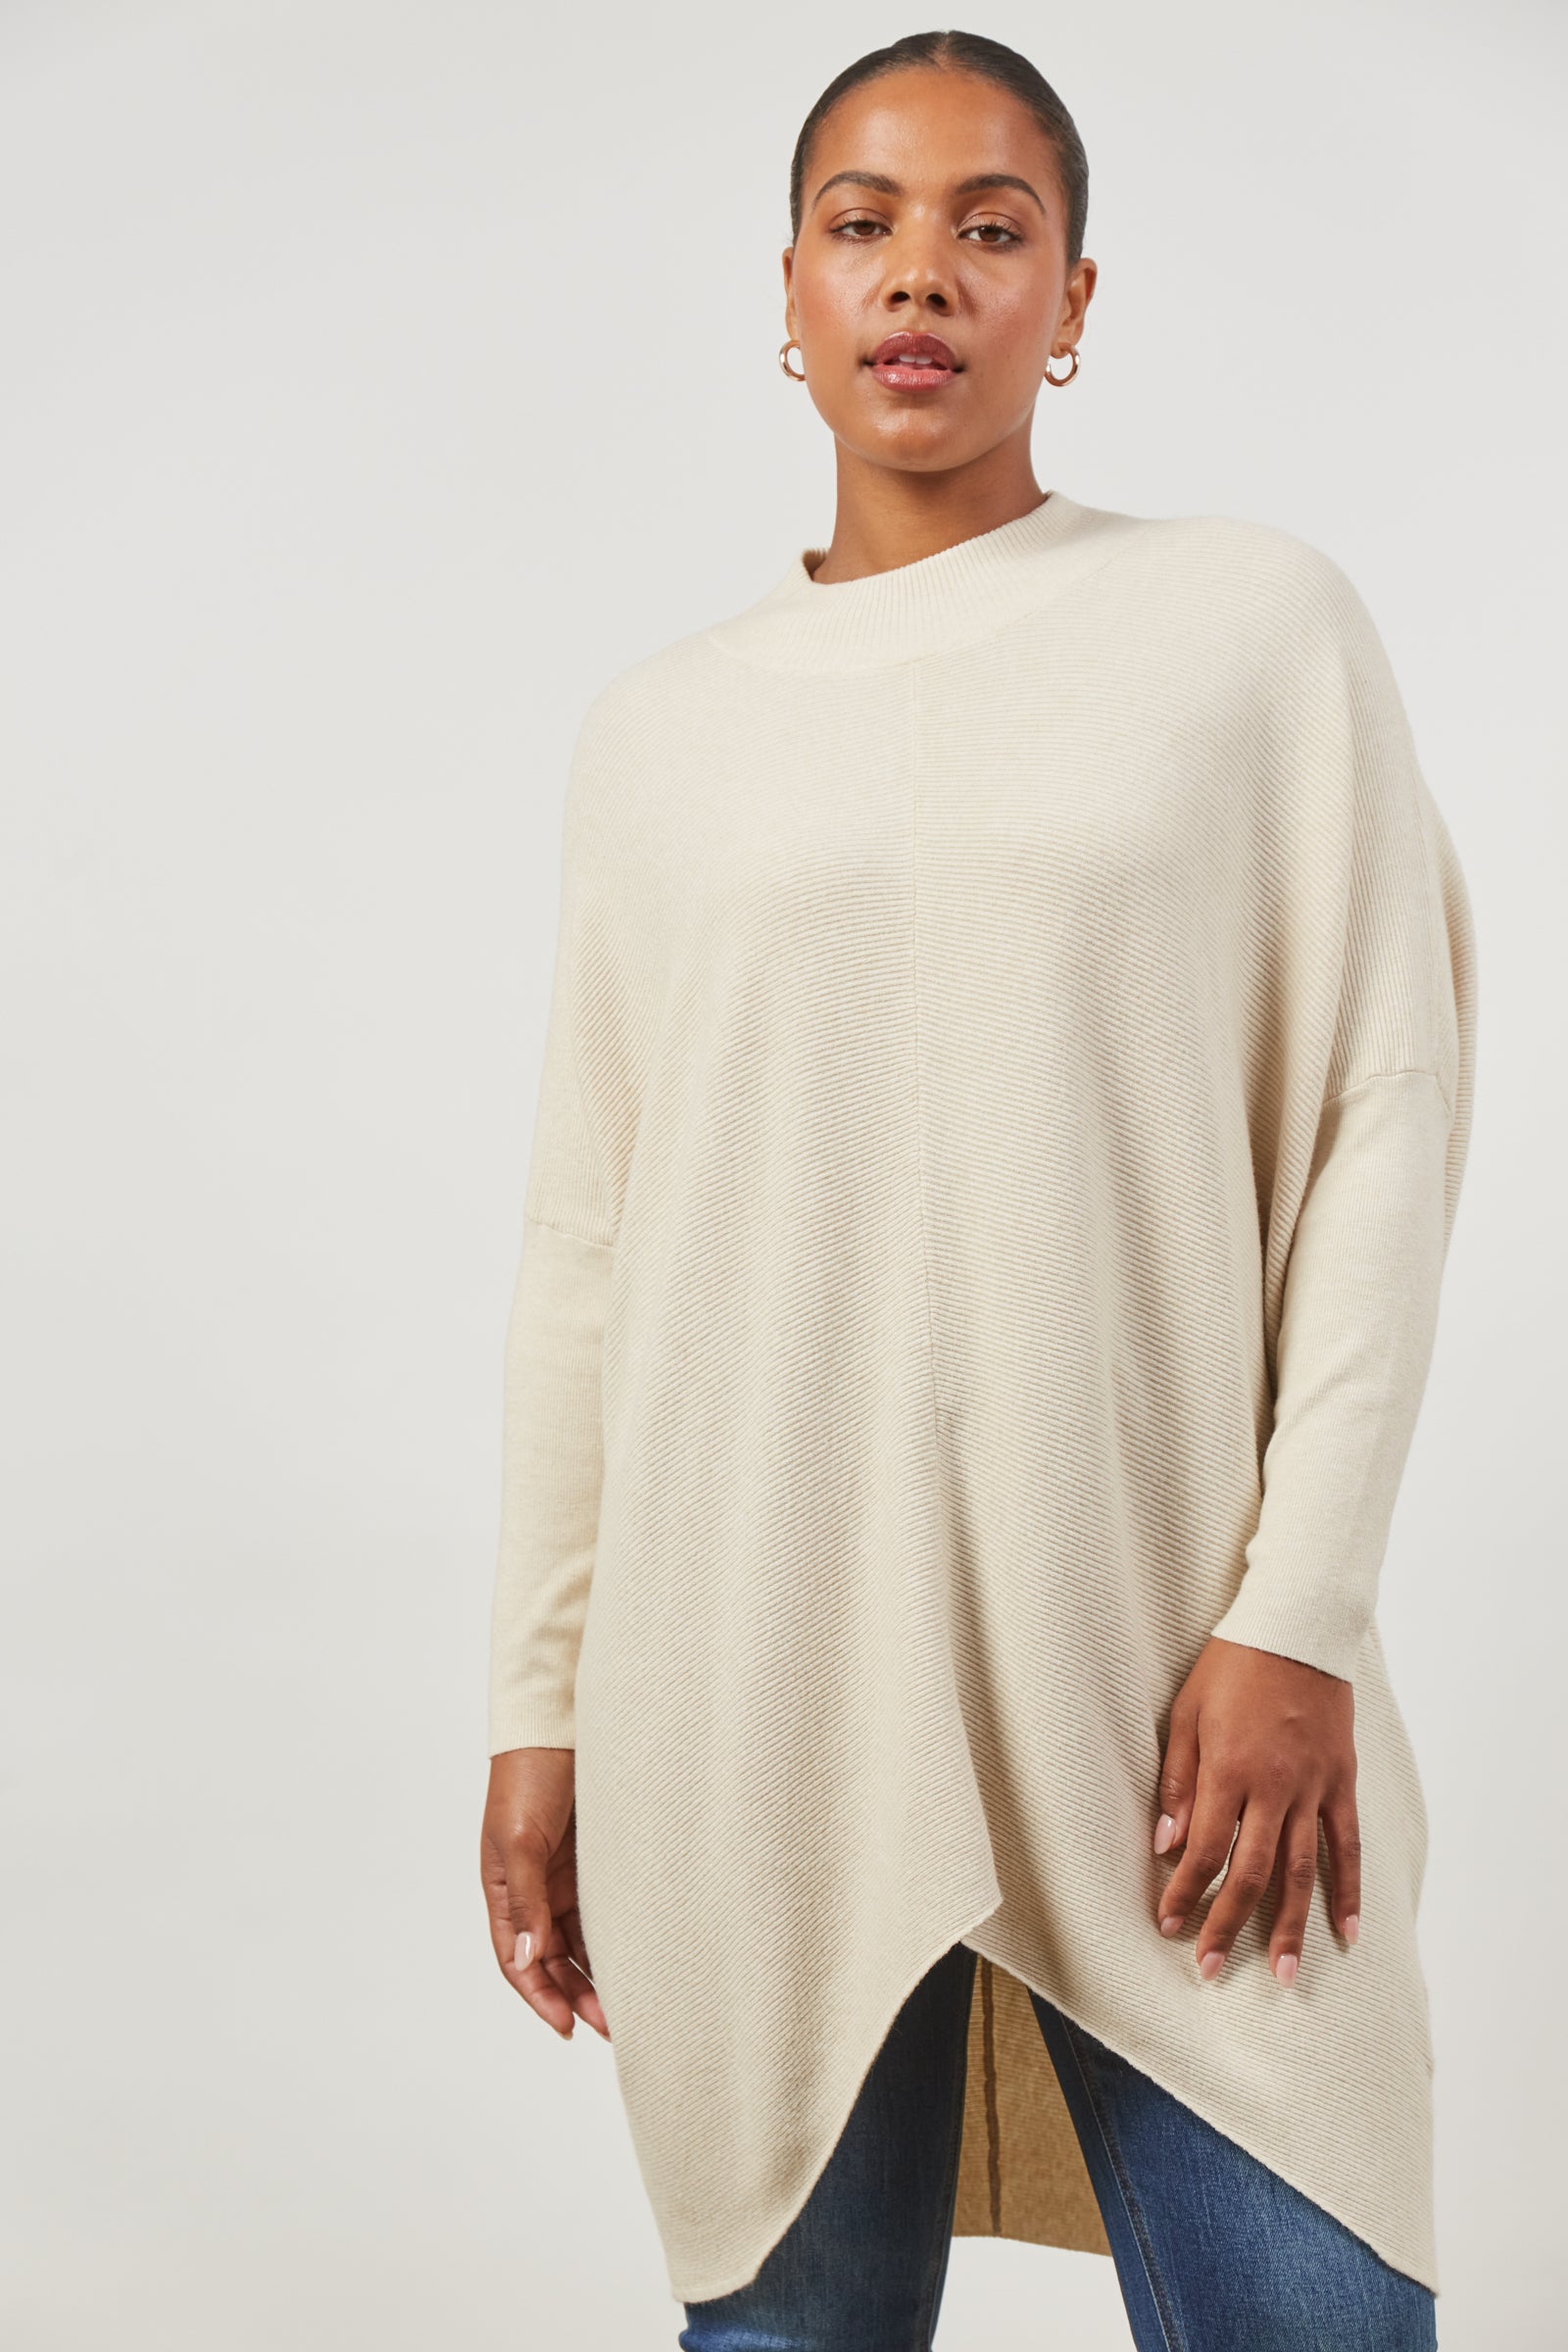 Cosmo Relax Jumper - Creme - Isle of Mine Clothing - Knit Jumper One Size